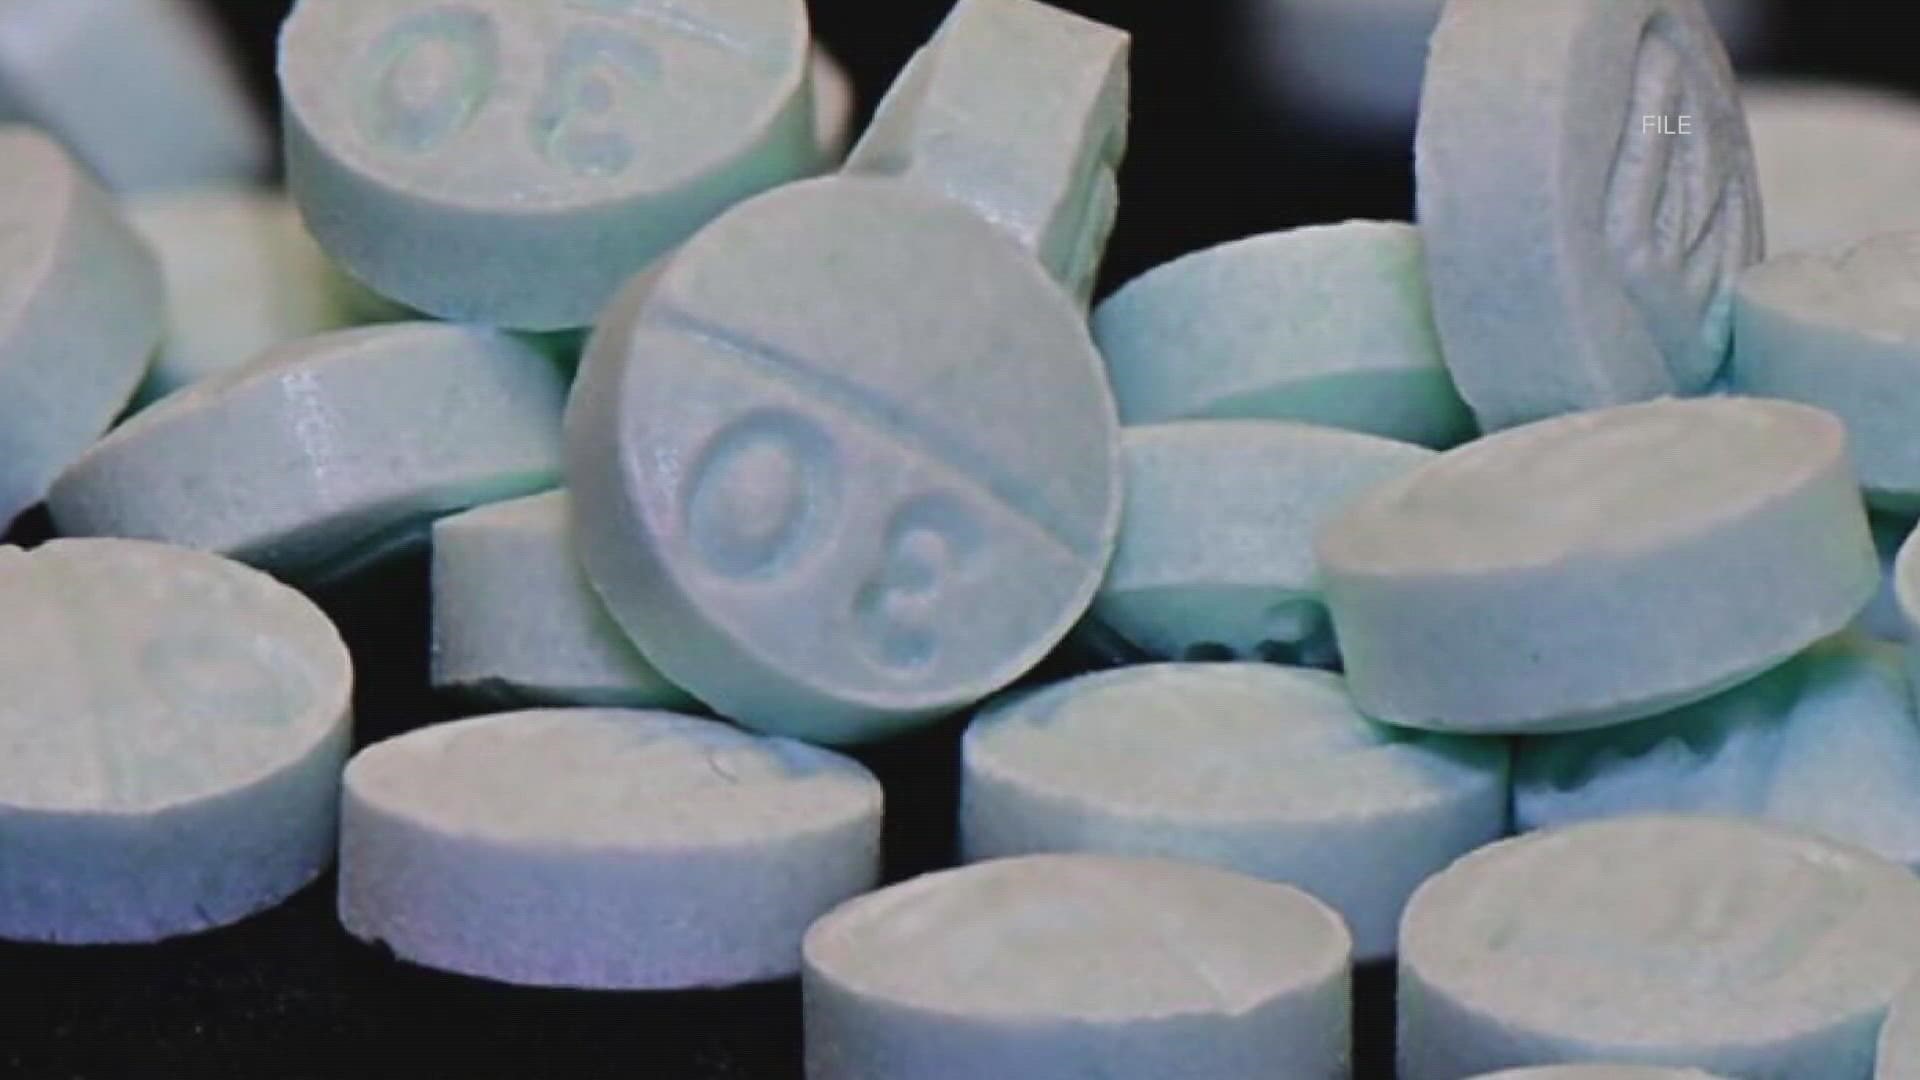 King County will receive $56 million from the opioid settlement, Pierce County will get $25.9 million, and Snohomish County will be awarded $25.4 million.